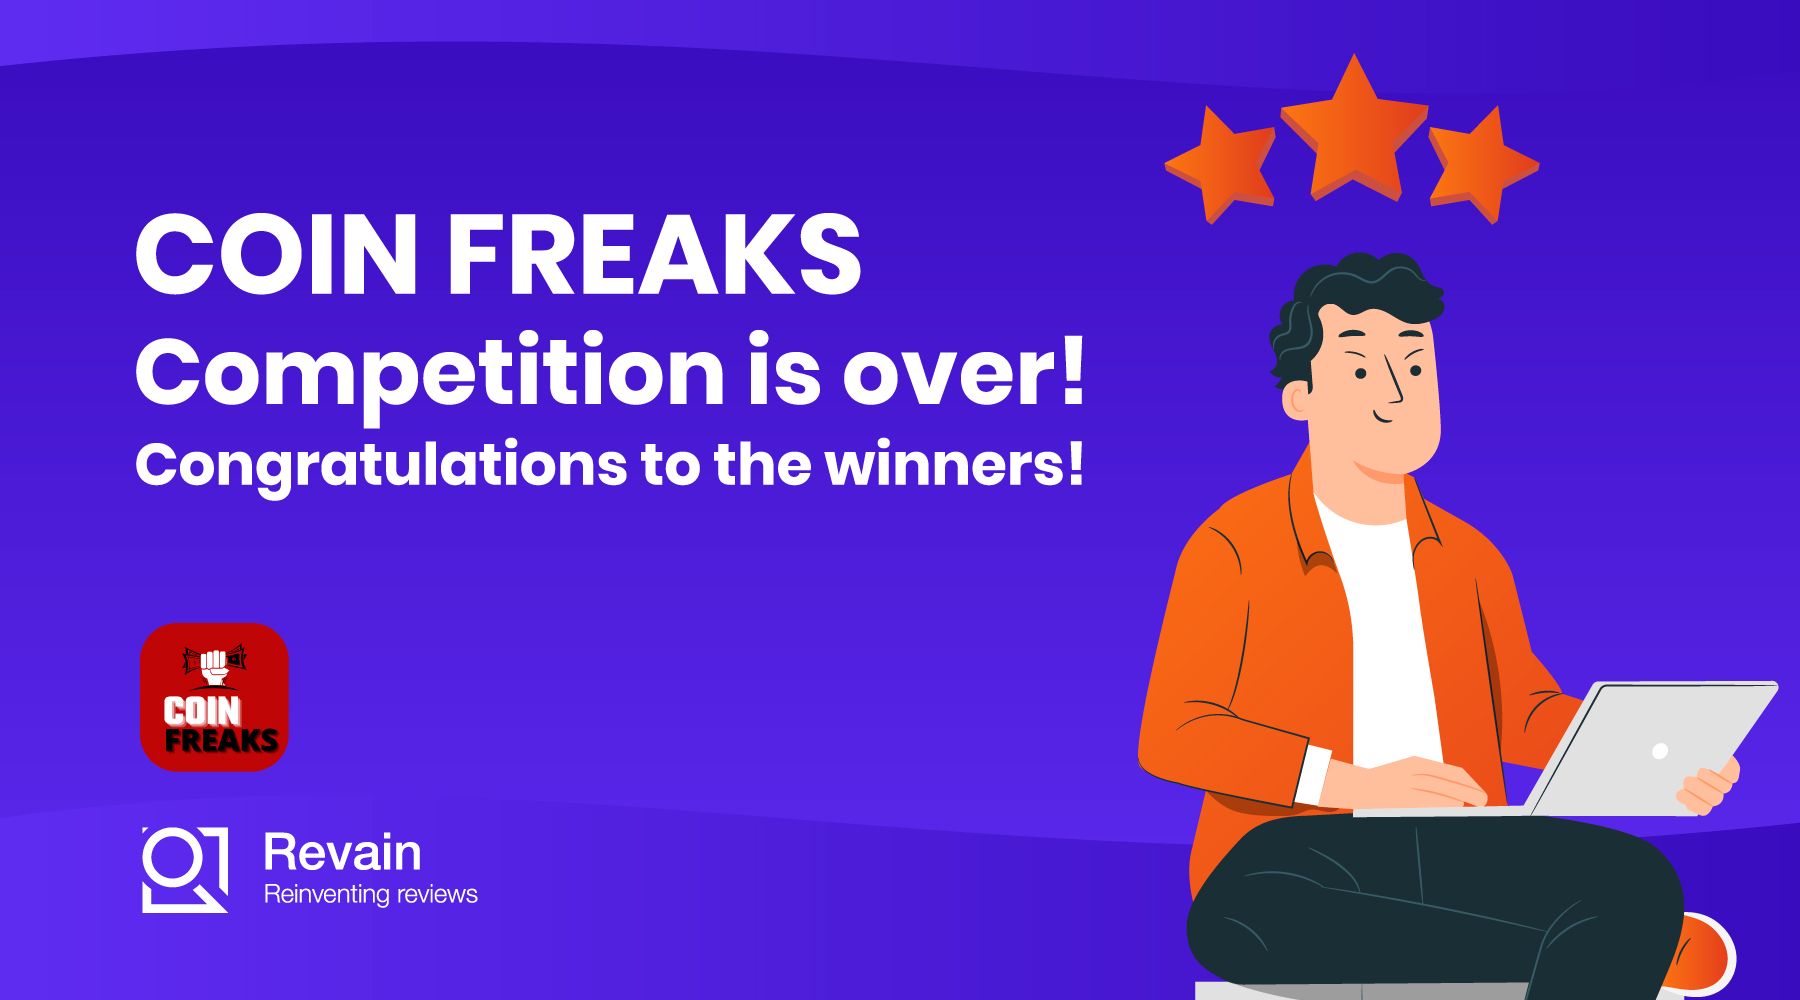 Article Revain and Coin Freaks review competition is over!